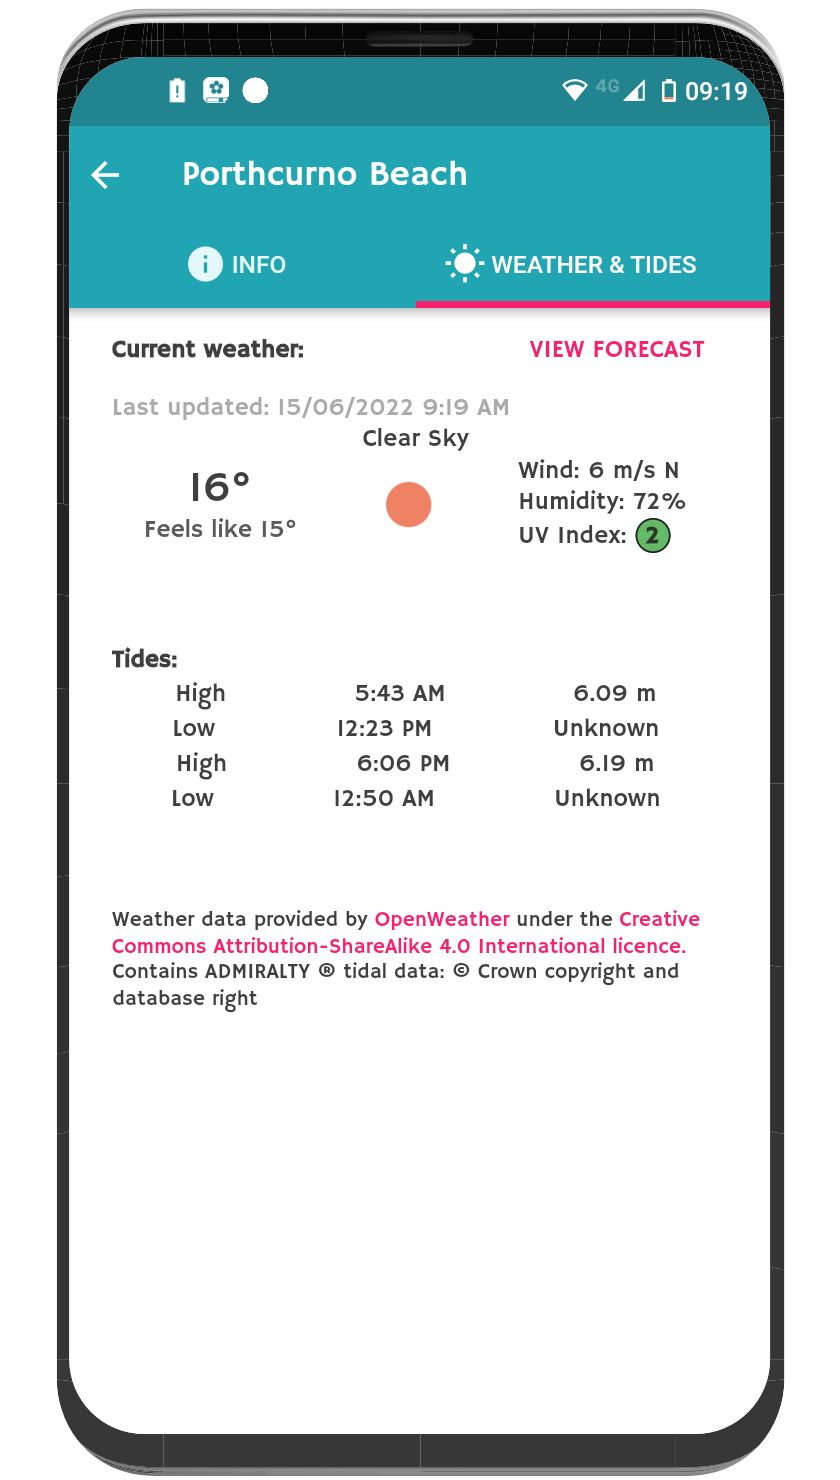 weather and tides view from the app